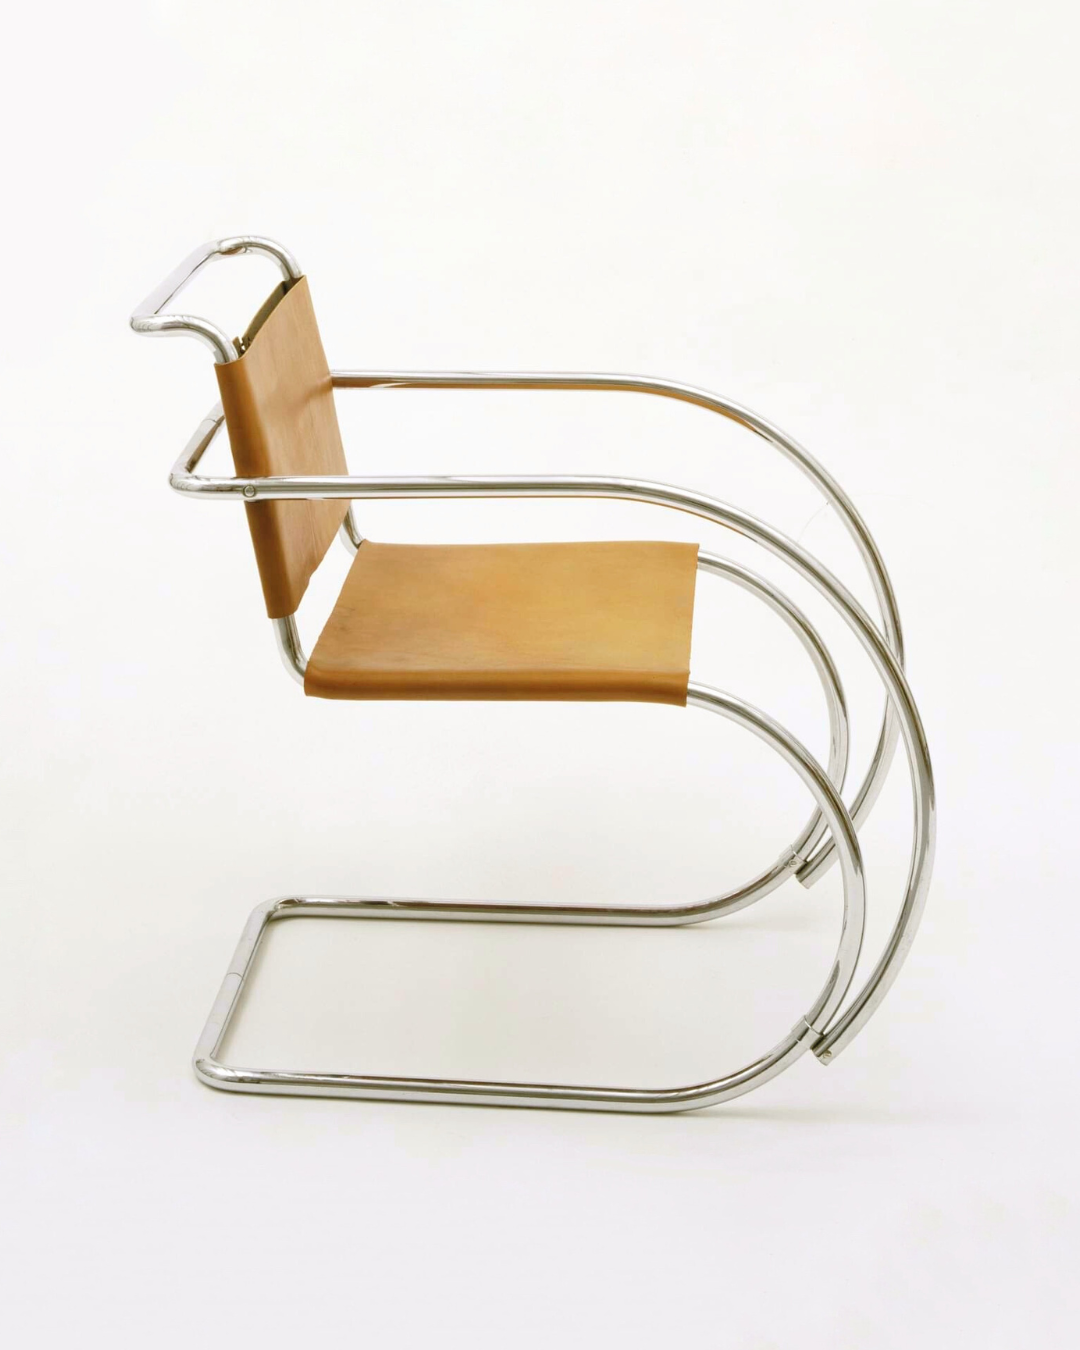 MR20 Chair by Ludwig Mies van der Rohe